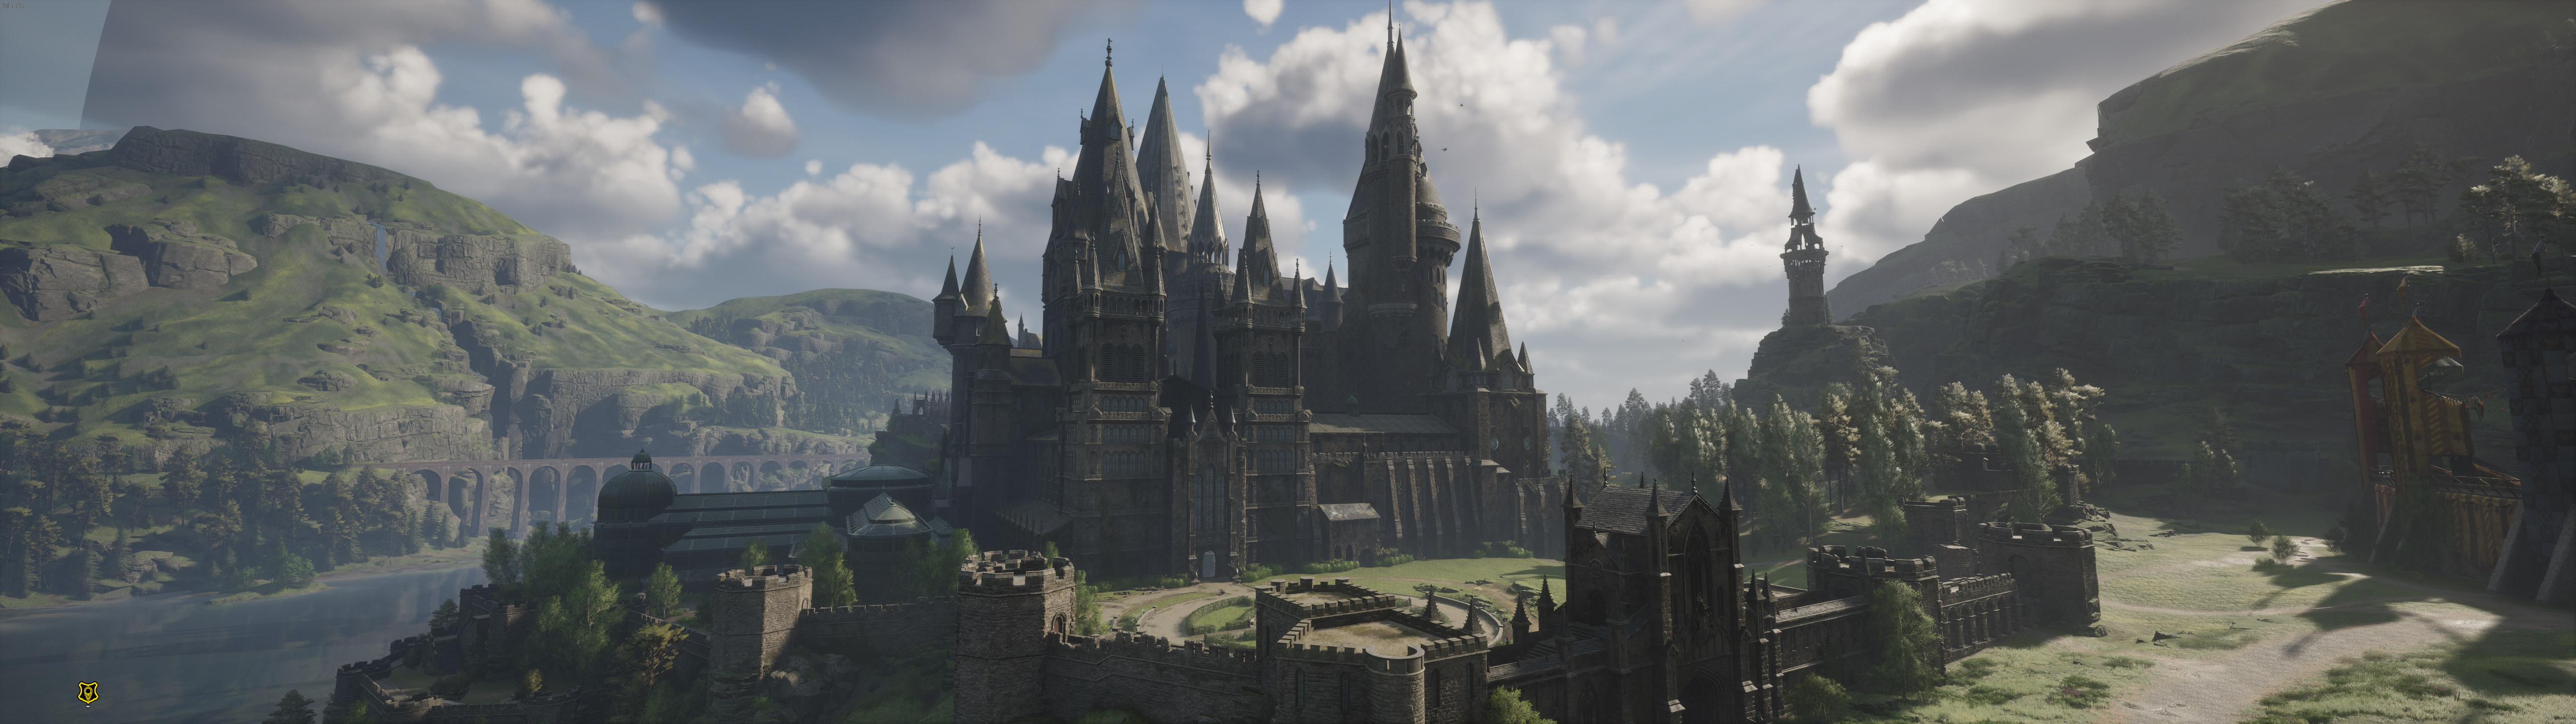 Hogwarts Legacy - How to Unlock Camera in-Game - Make cinematic screenshots with unlocked camera - 529D07B